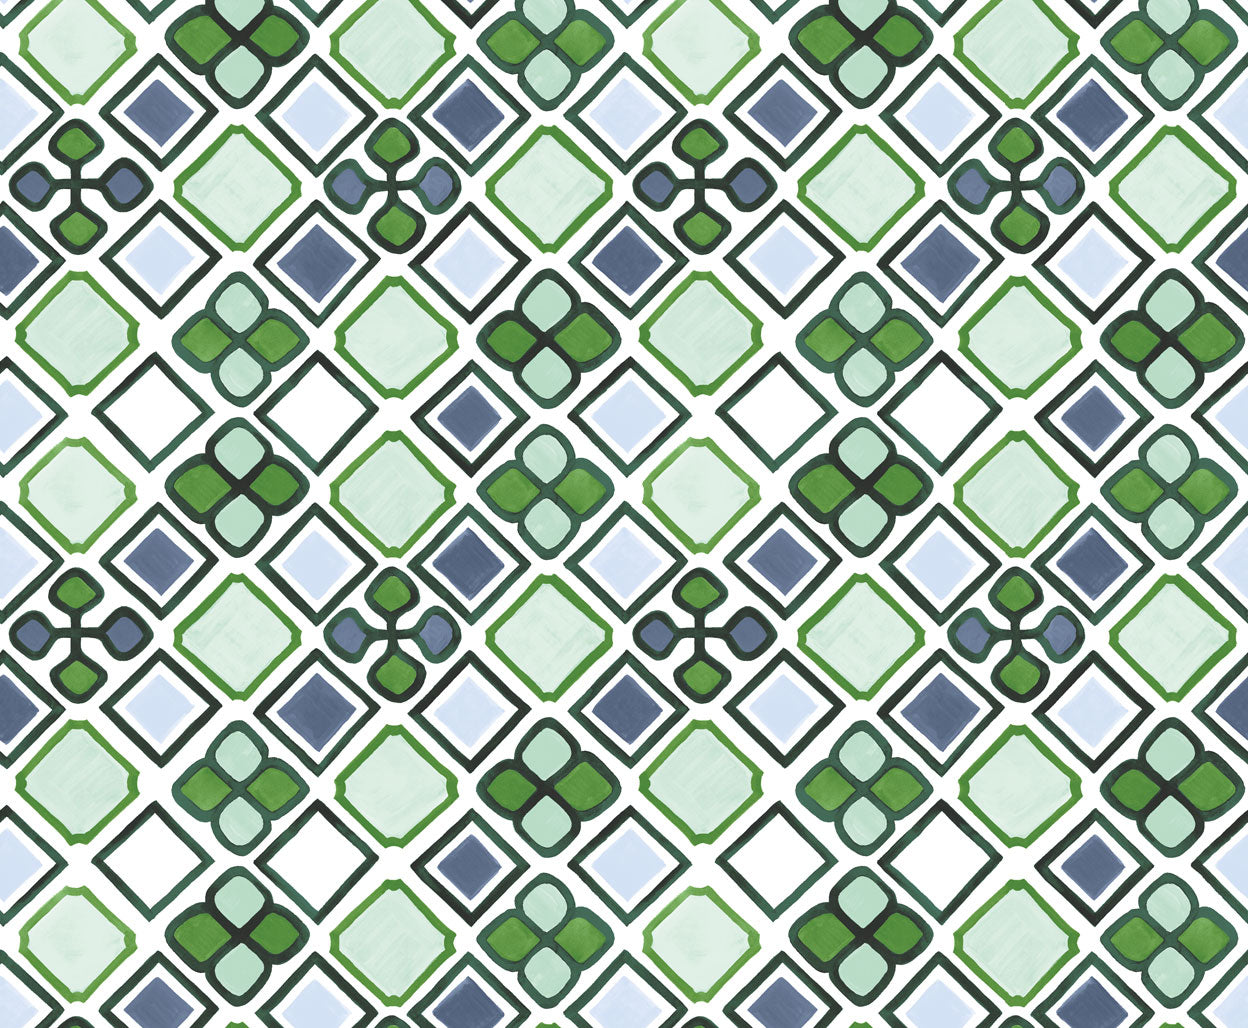 Detail of fabric in a geometric diamond and floral print in shades of green, purple and white.